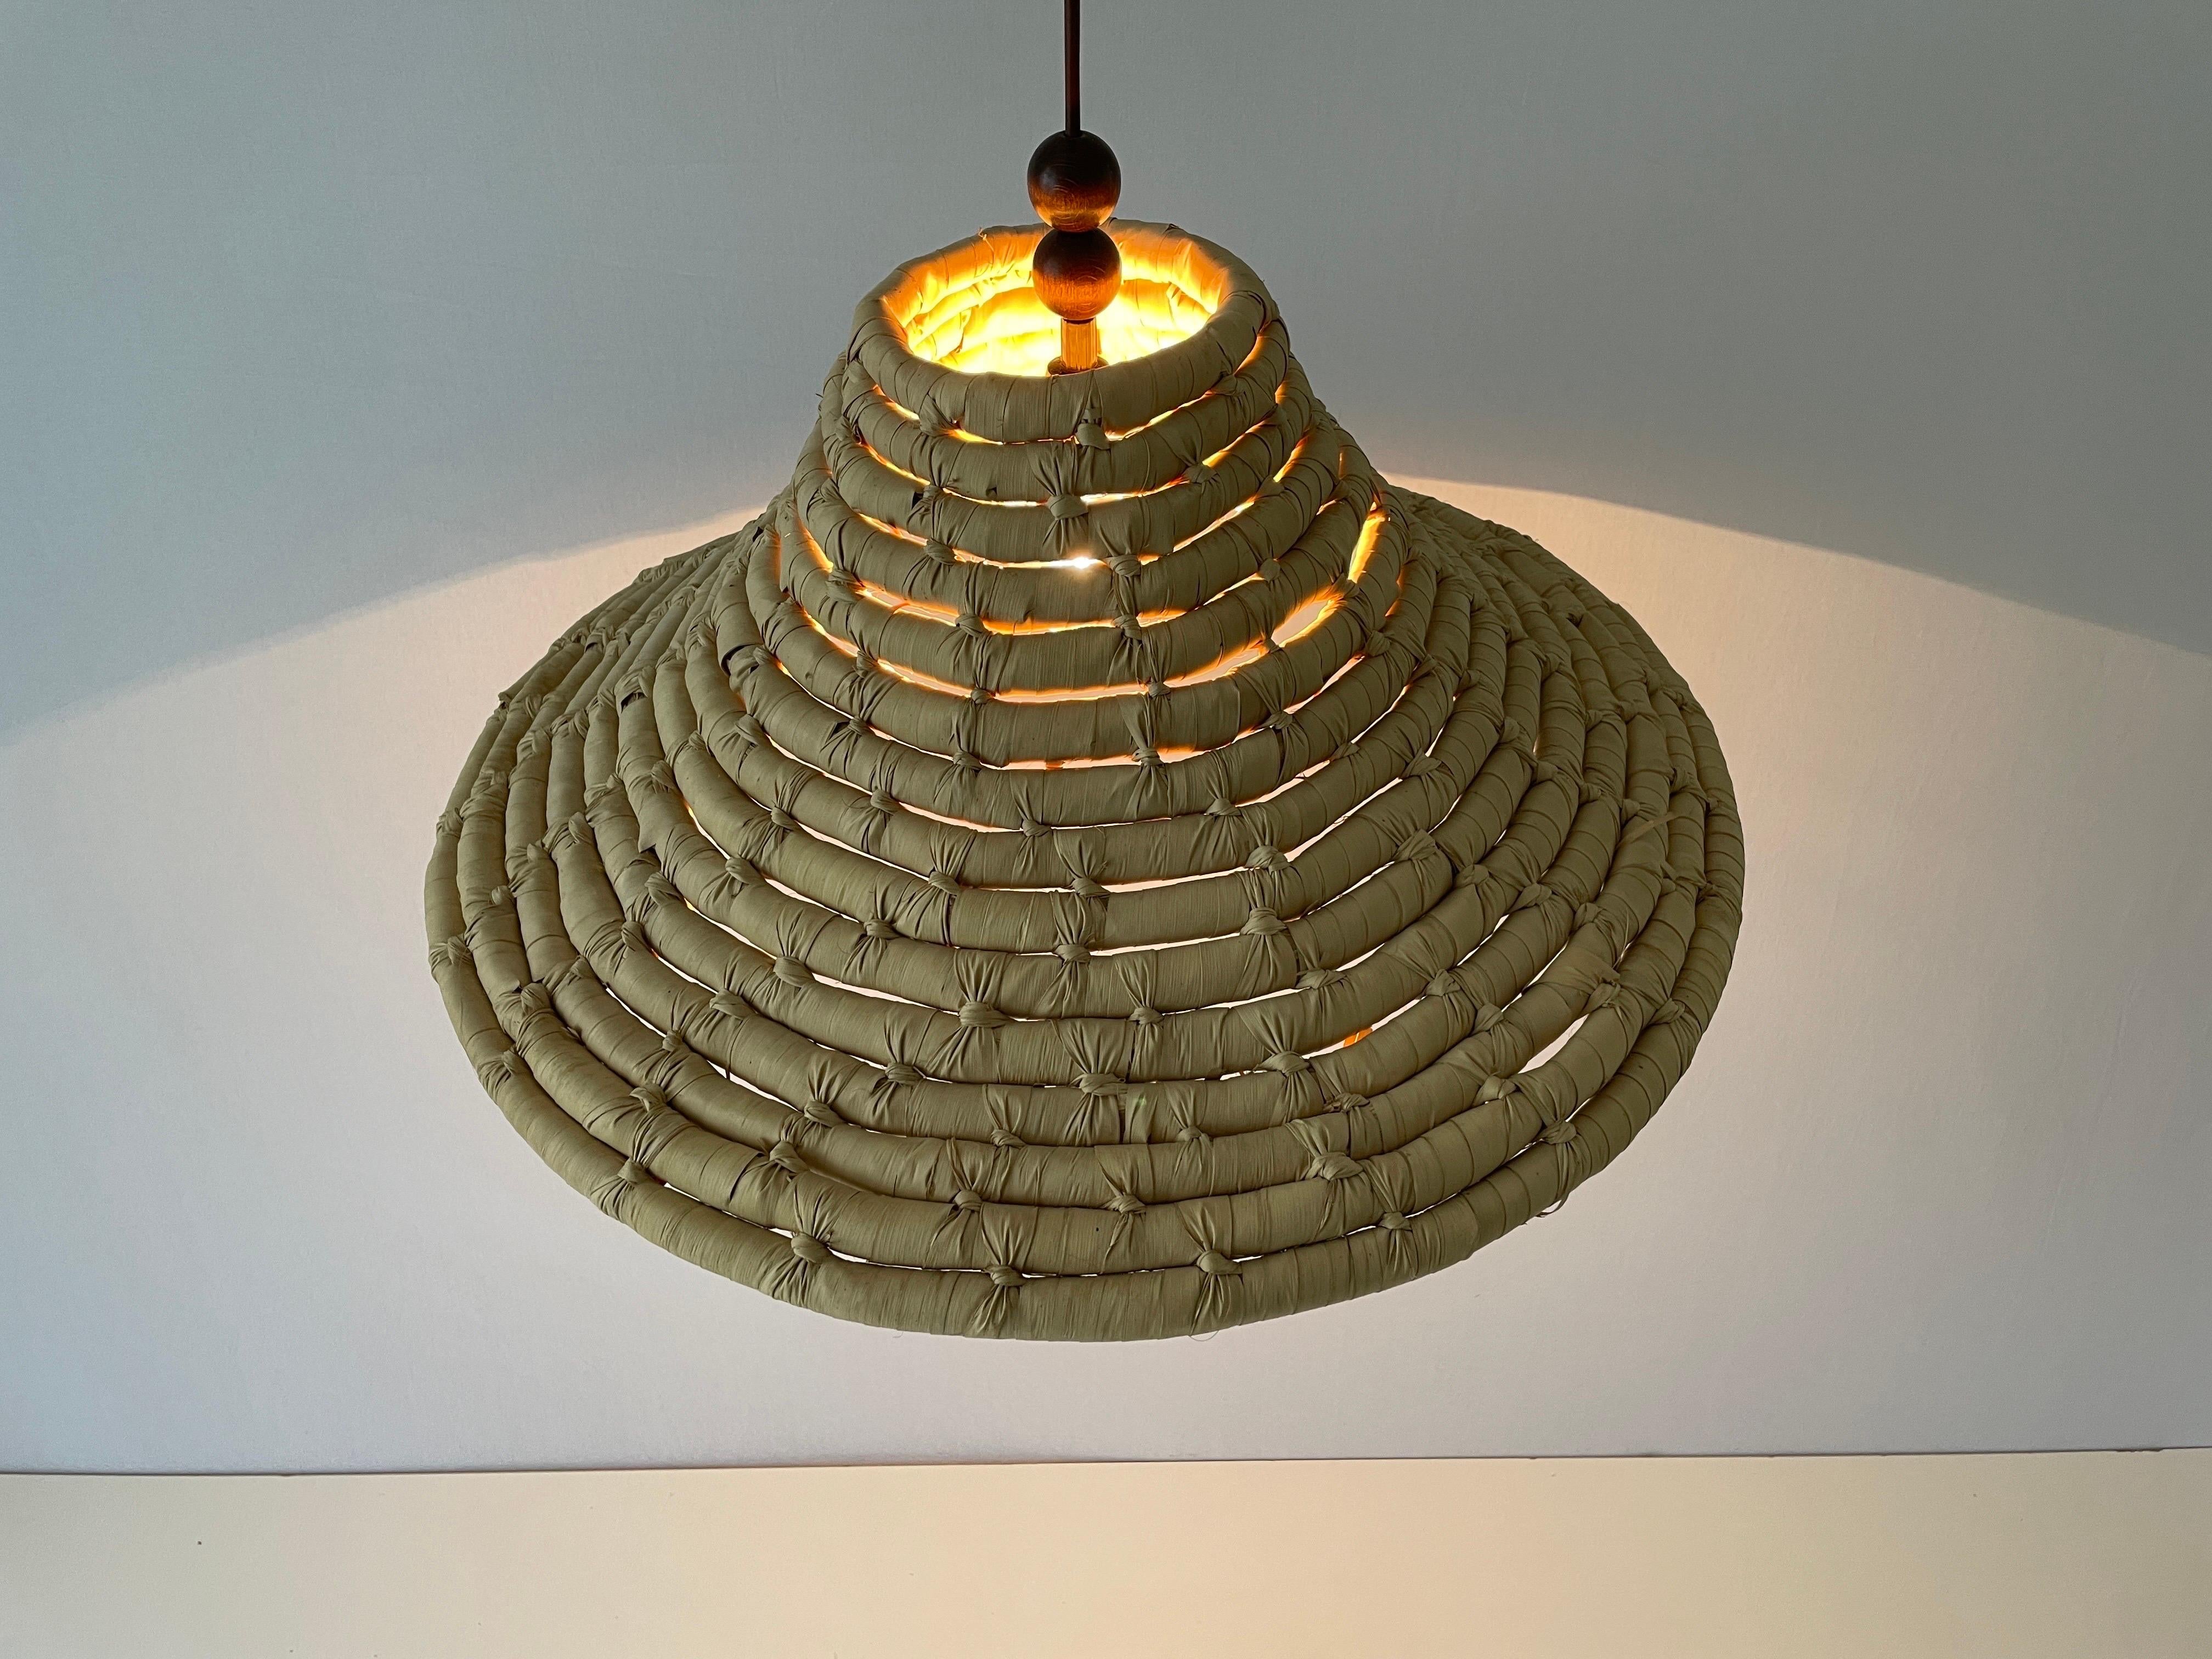 Unusual Large Made of Natural Plant Material Pendant Lamp, 1960s, Germany For Sale 6